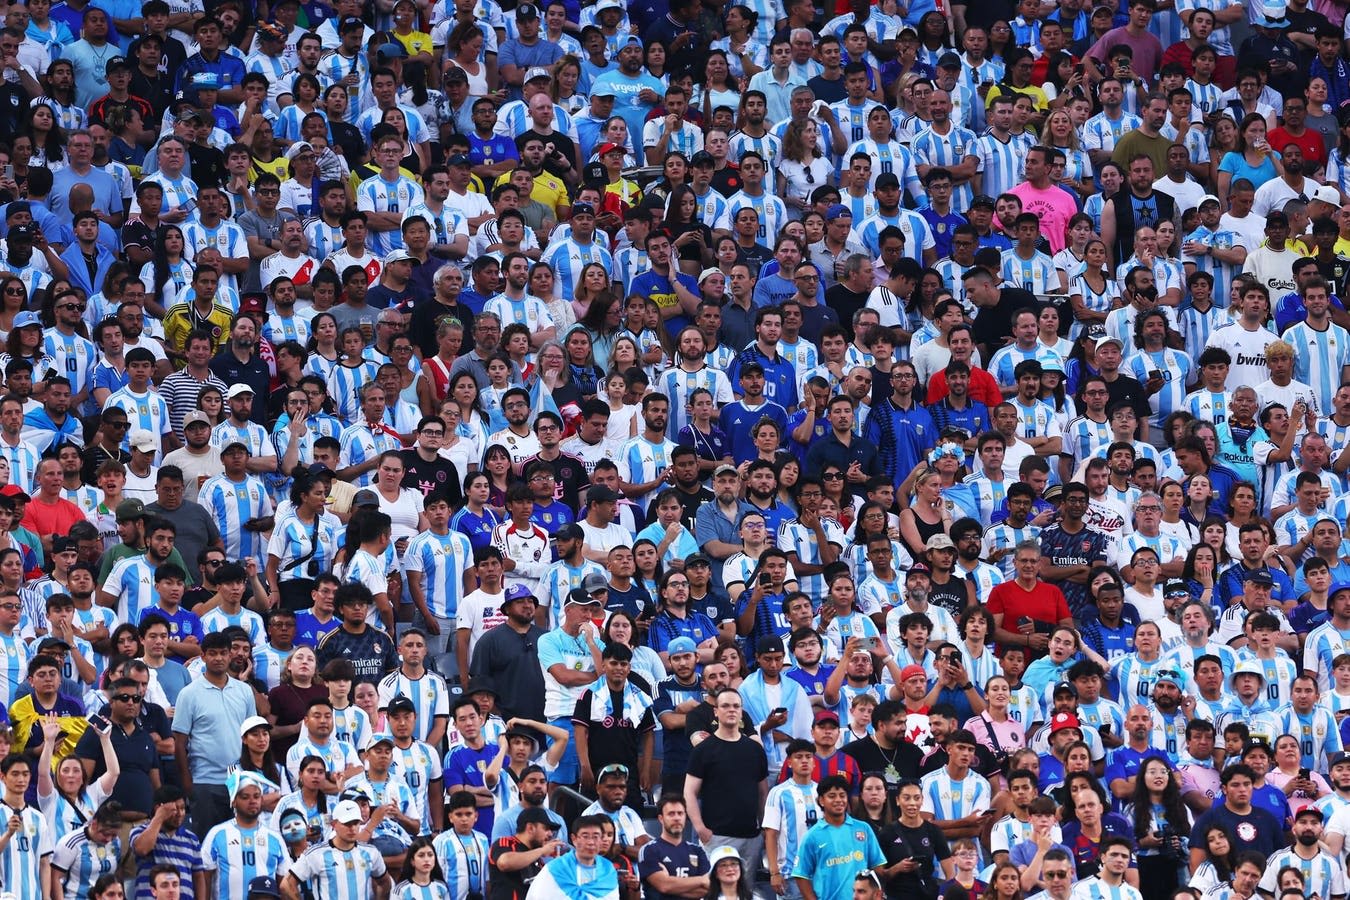 Crazy Copa América Ticket Prices Result In Many Empty Seats